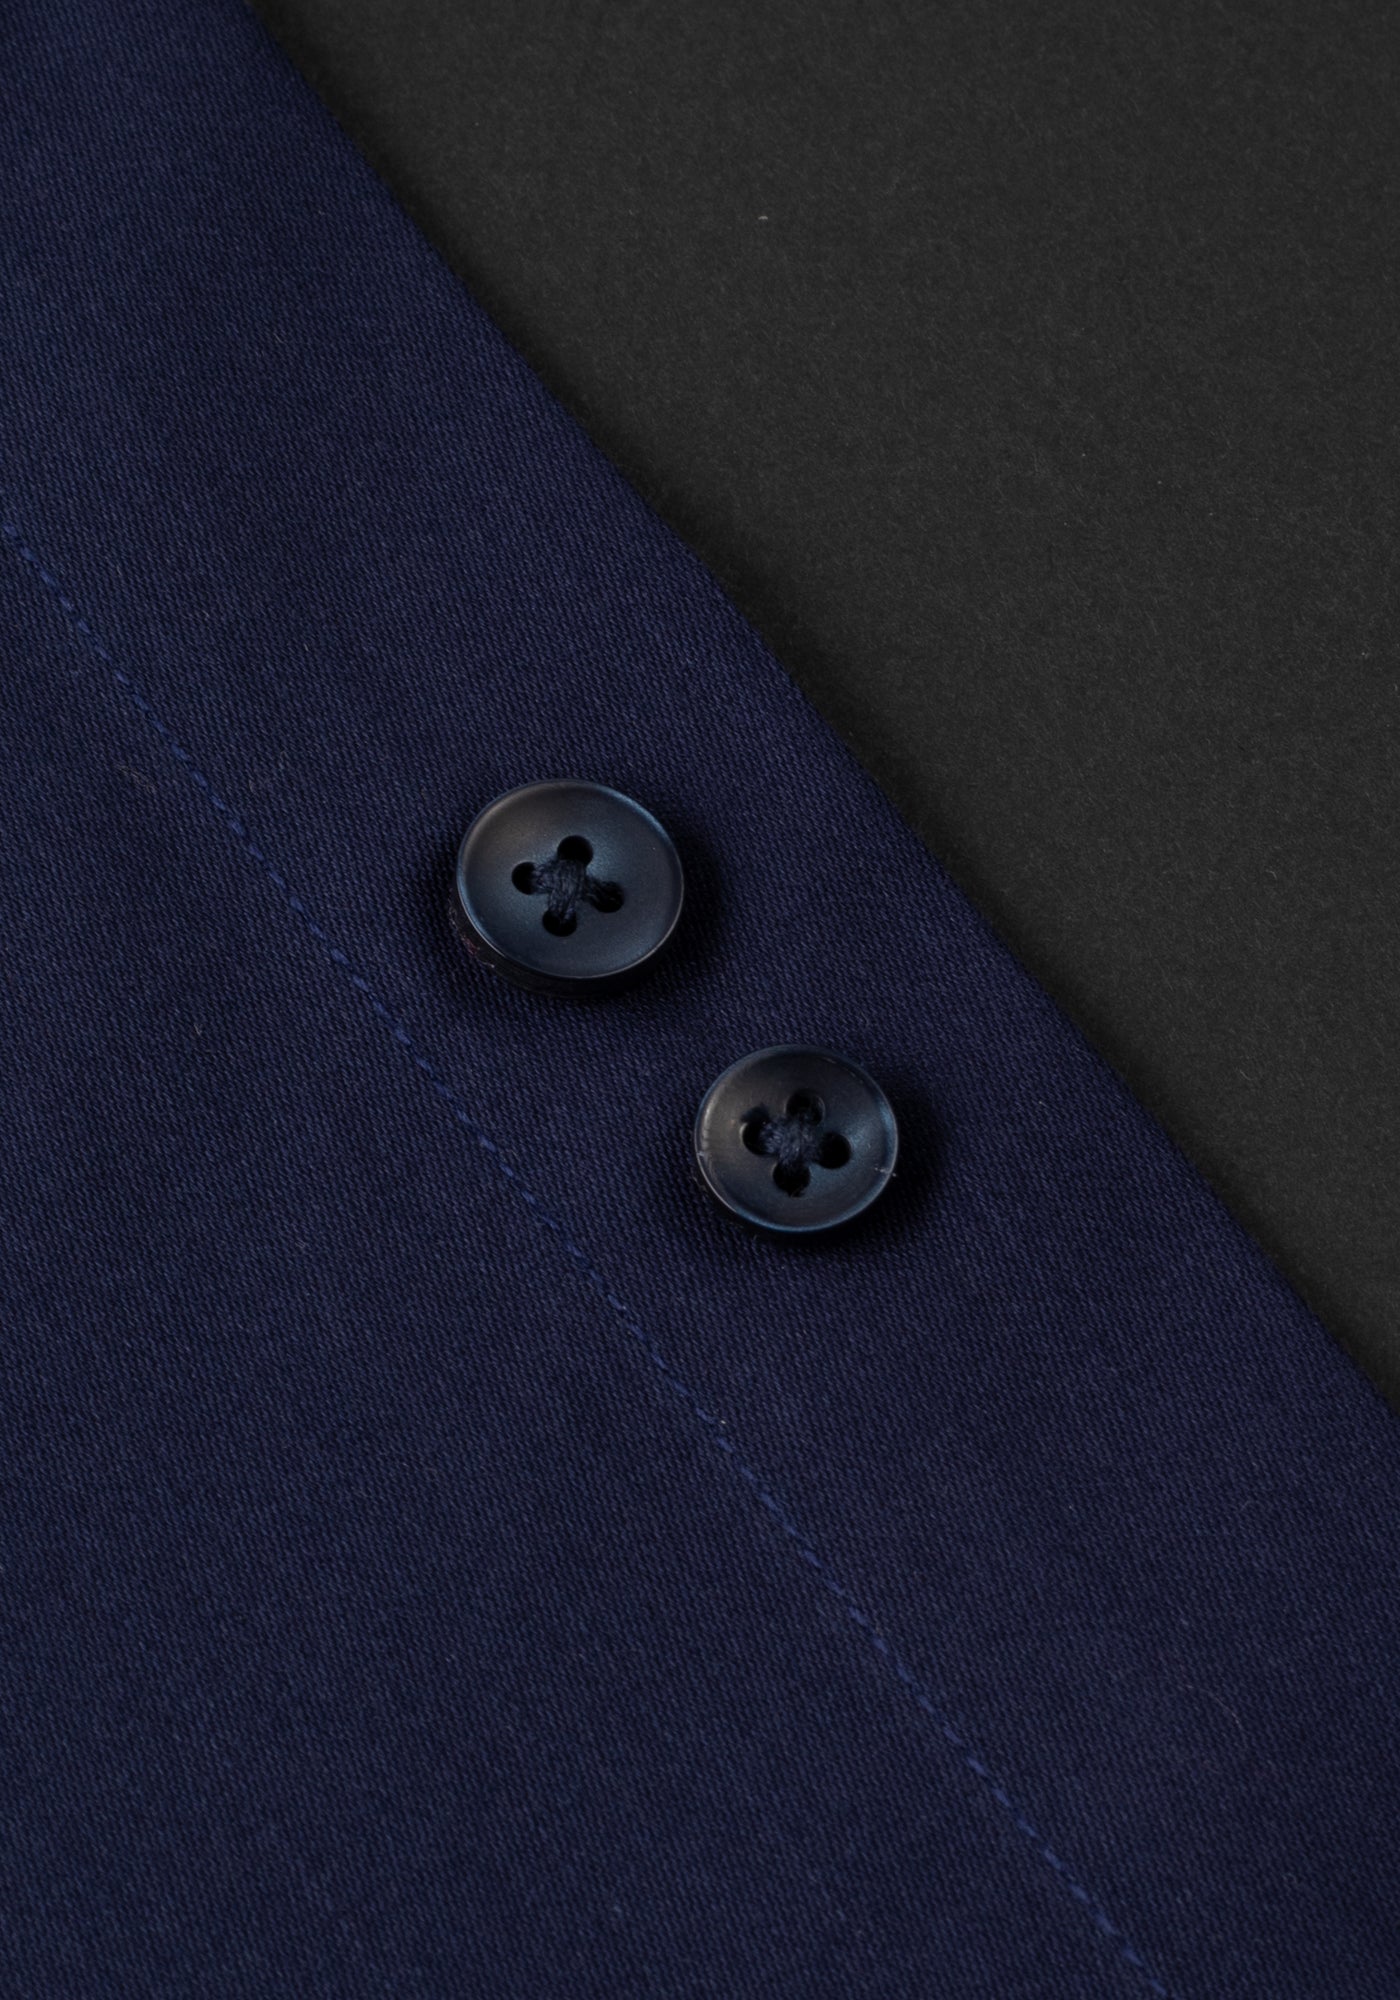 Royal Navy Luxe Twill Shirt